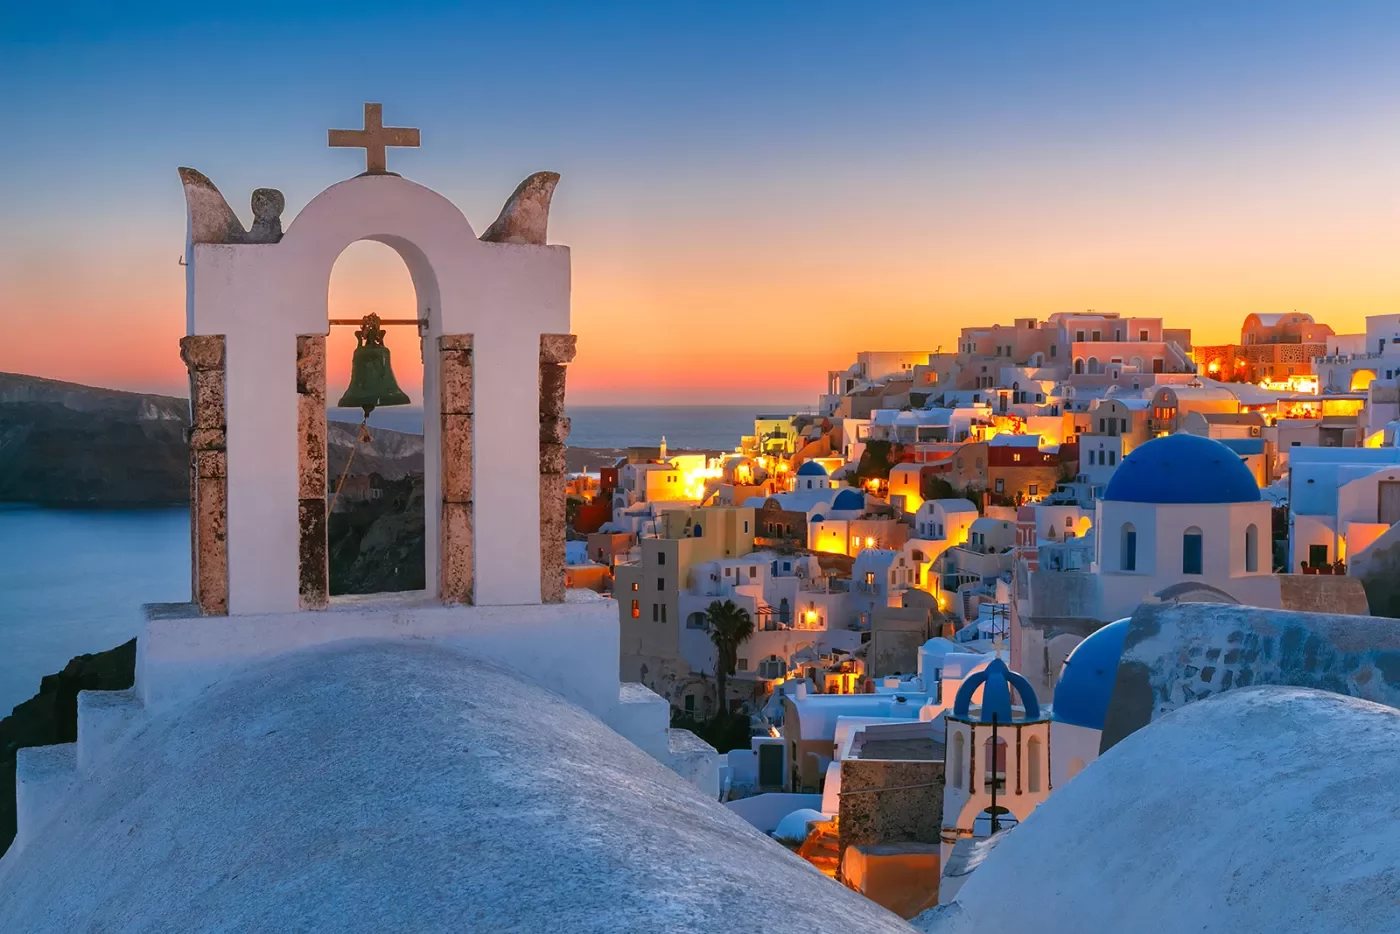 Sunset shot of Santorini, city lit up, church bell in foreground.